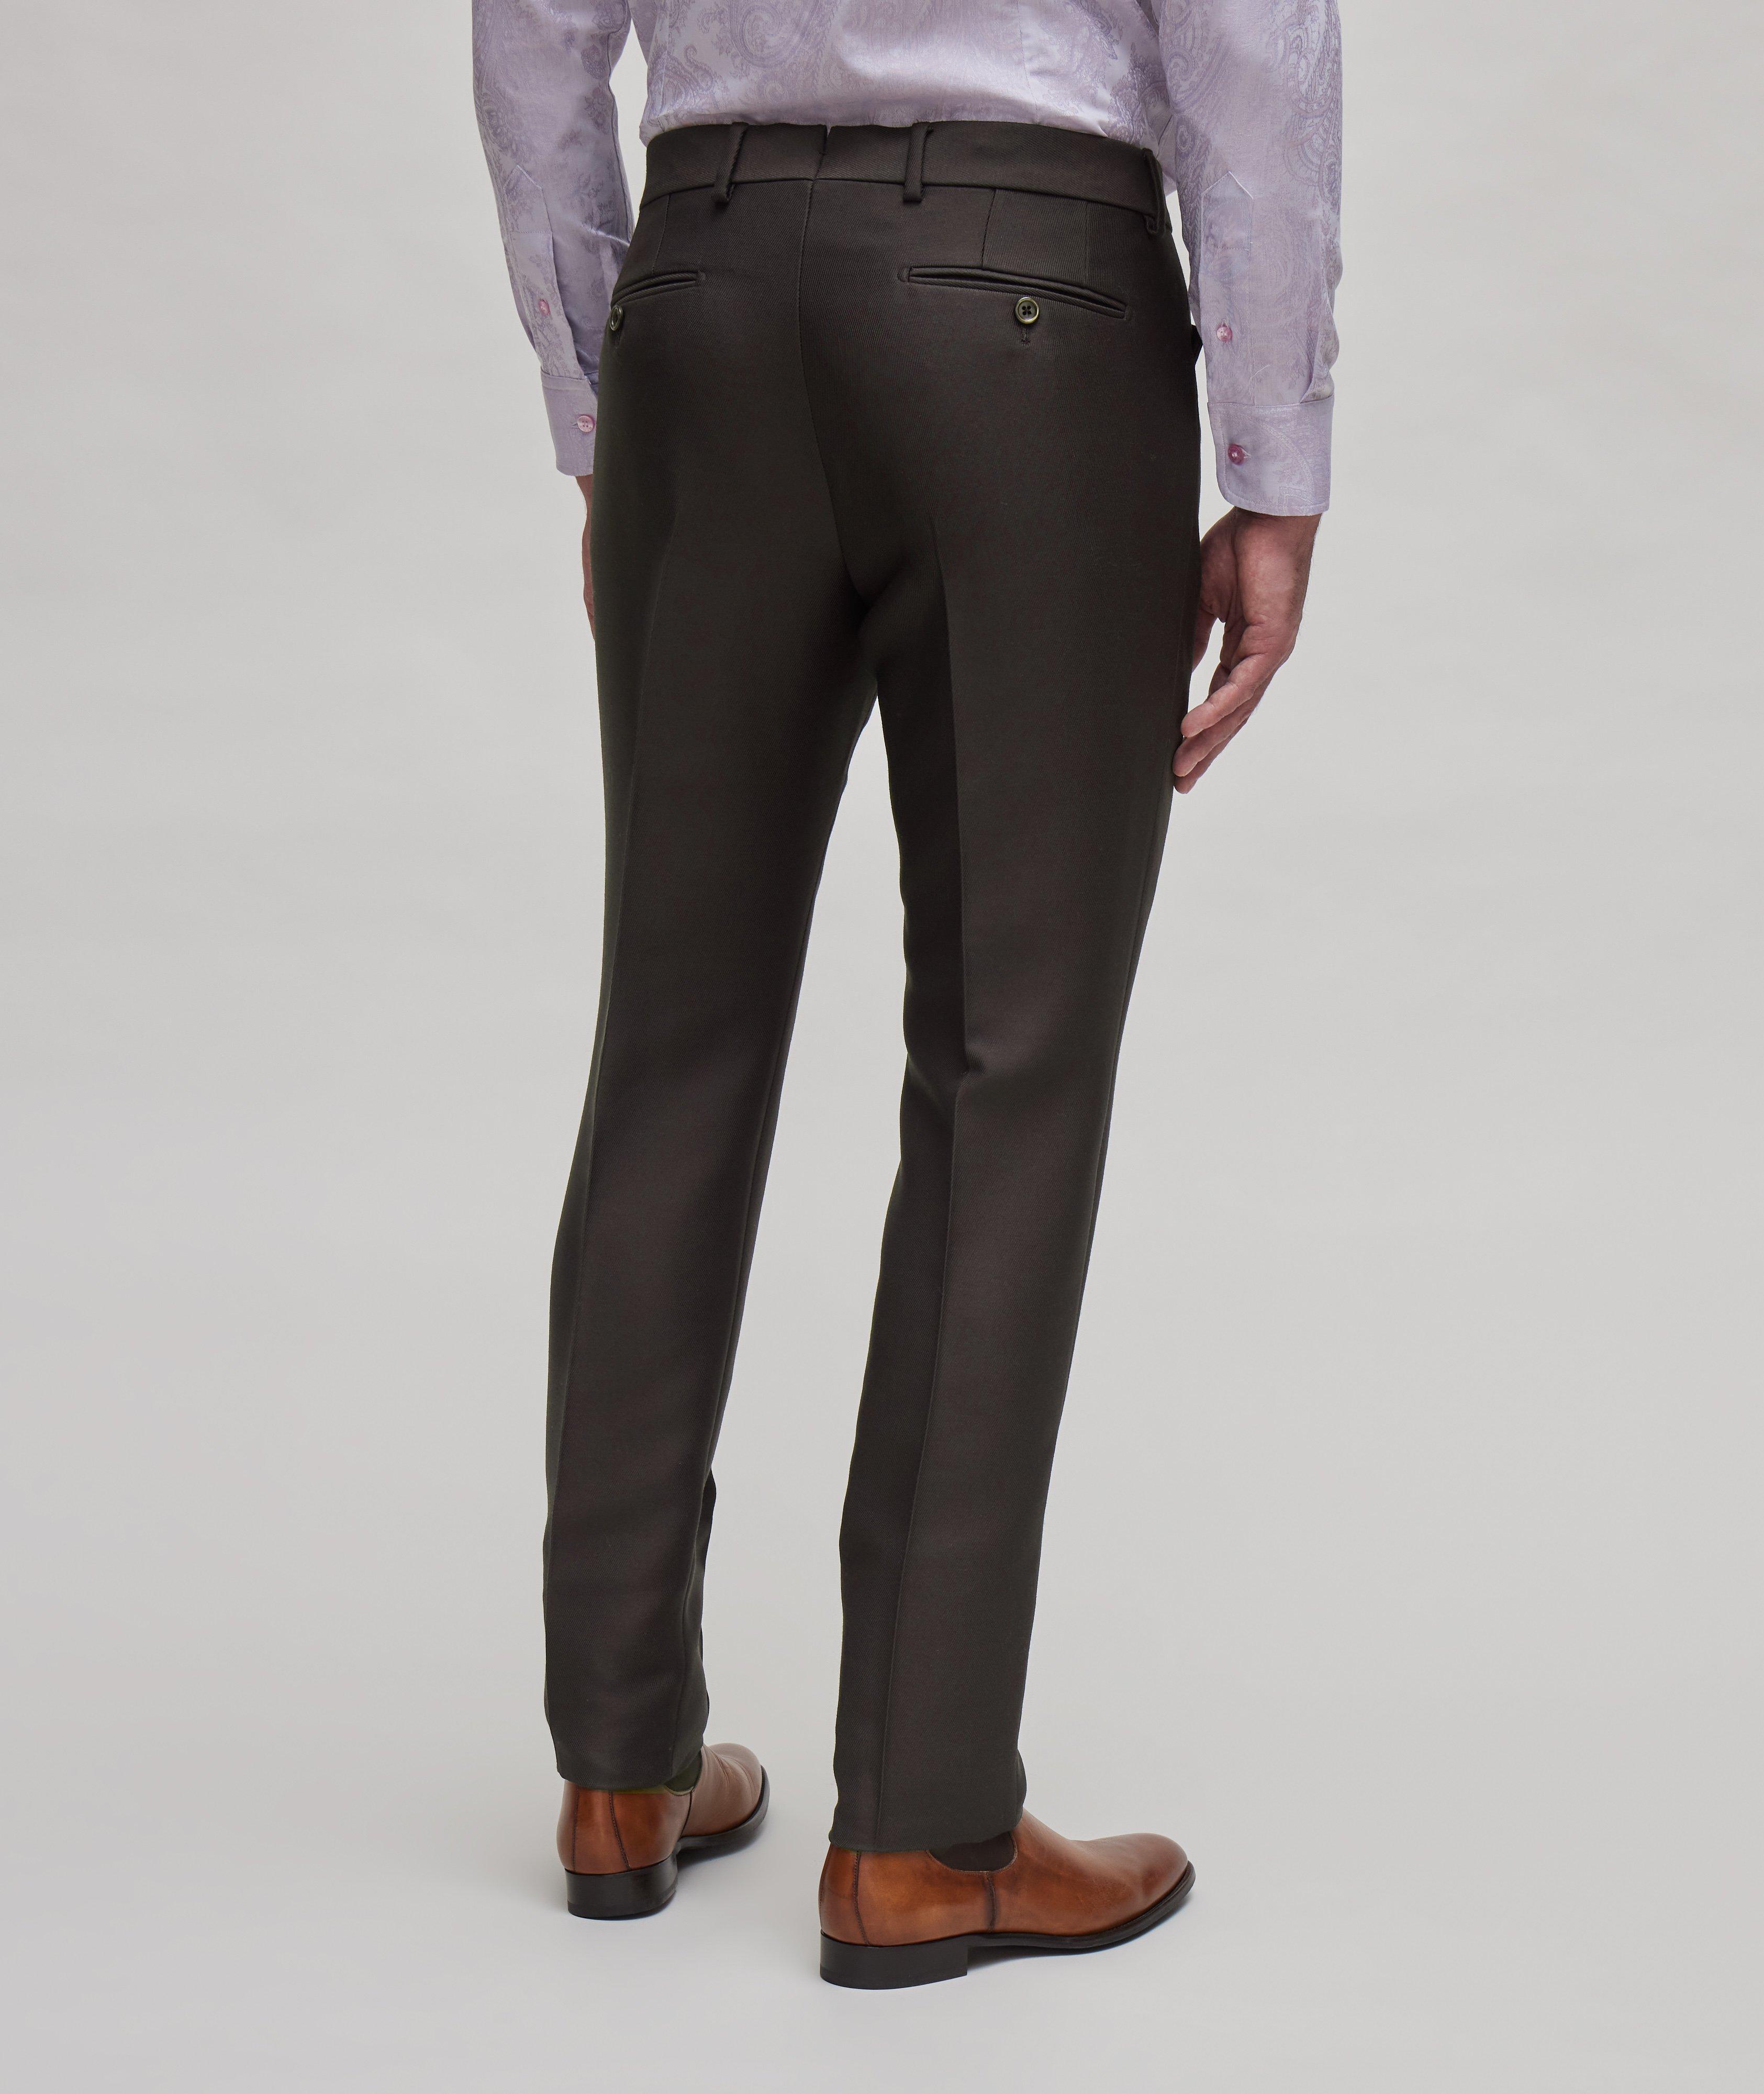 Atticus Western Style Five-Pocket Pants  image 2